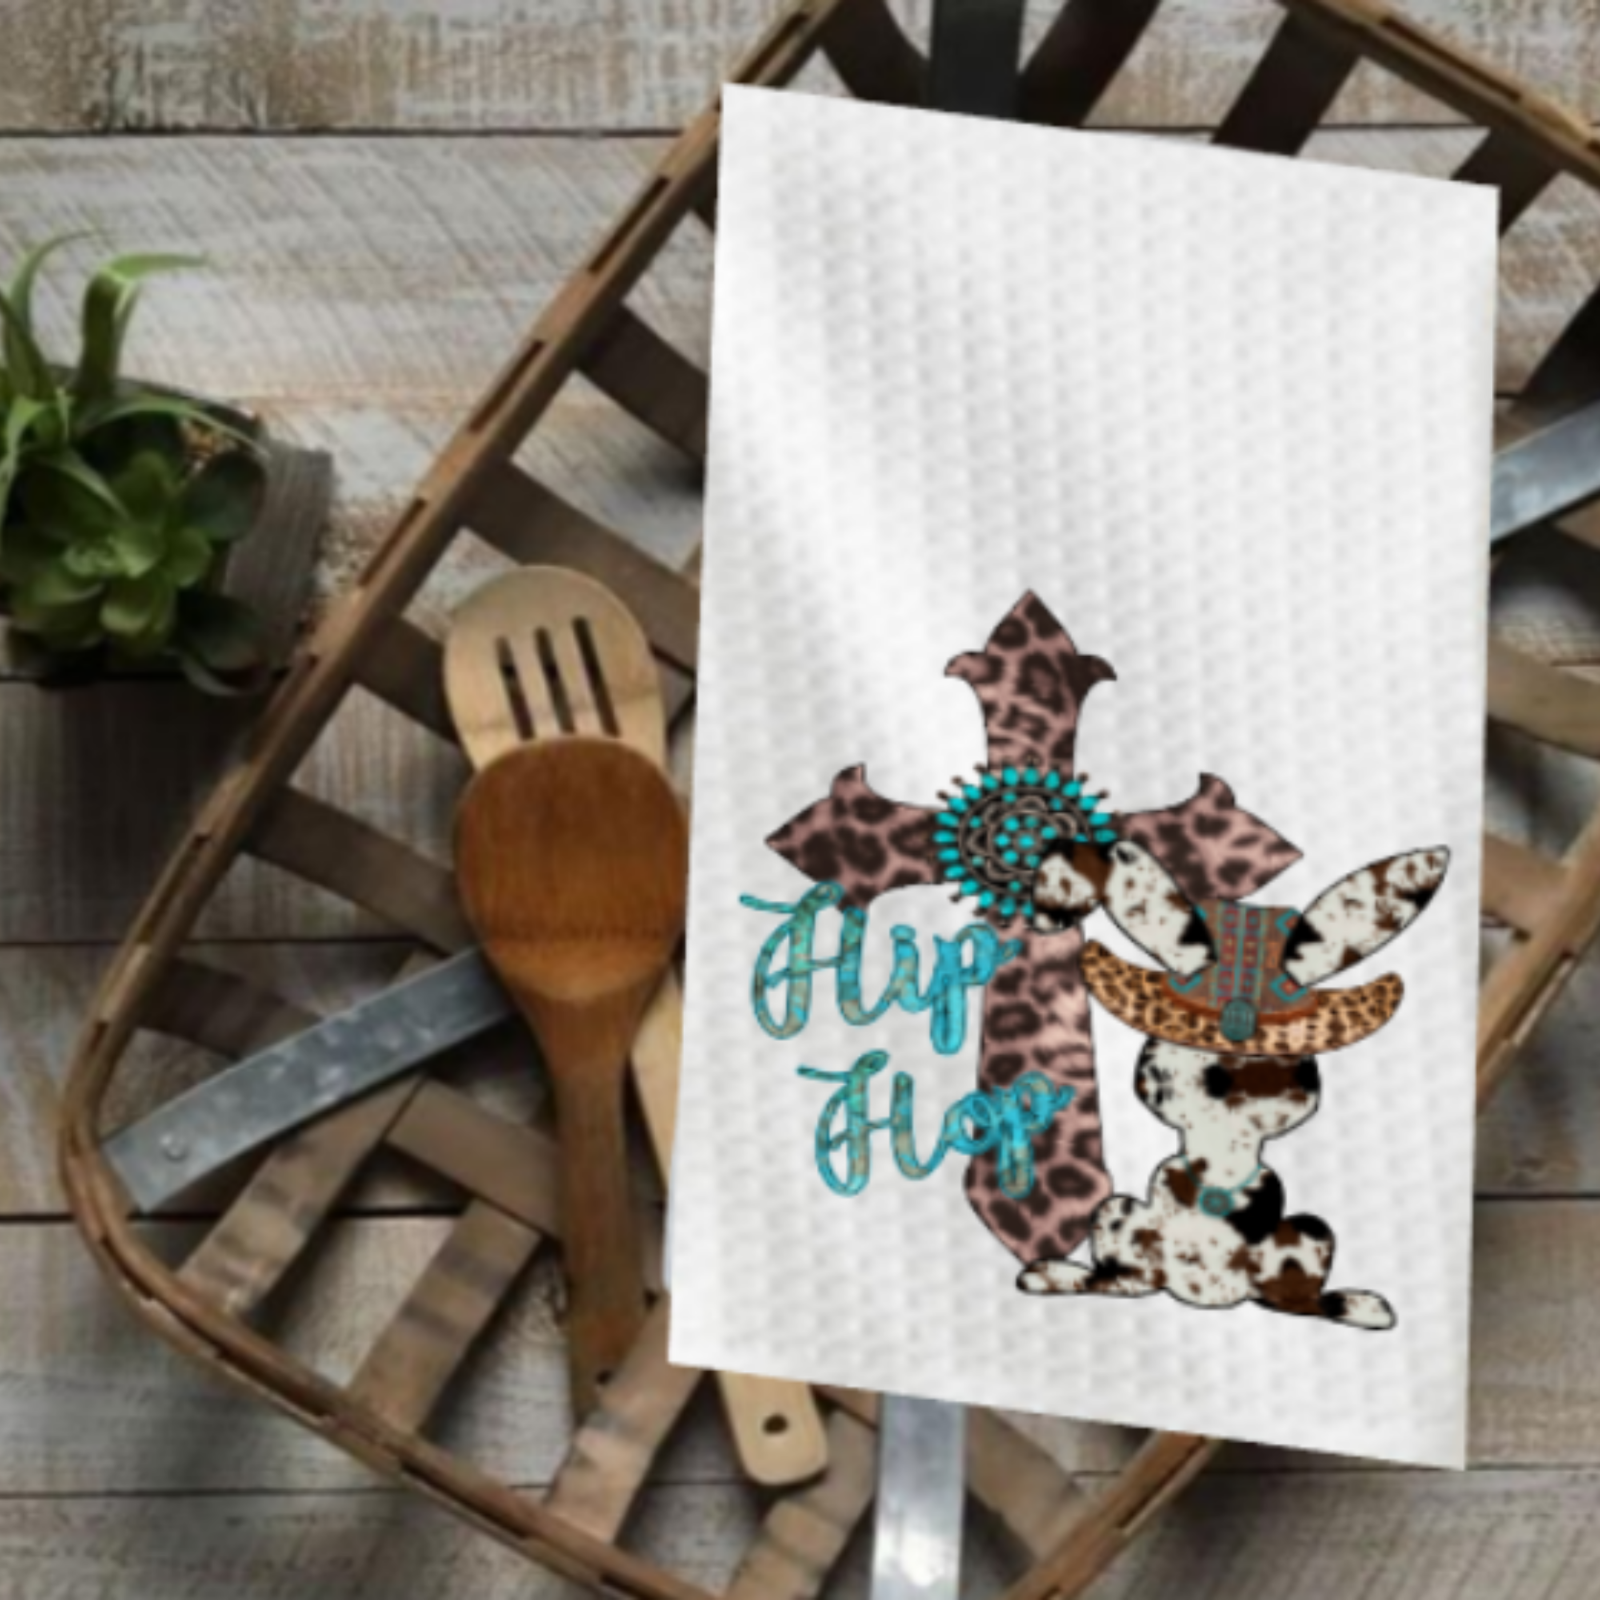 4 Pieces Funny Hand Towel with Sayings Decorative Kitchen Towels Rustic  Bath Han